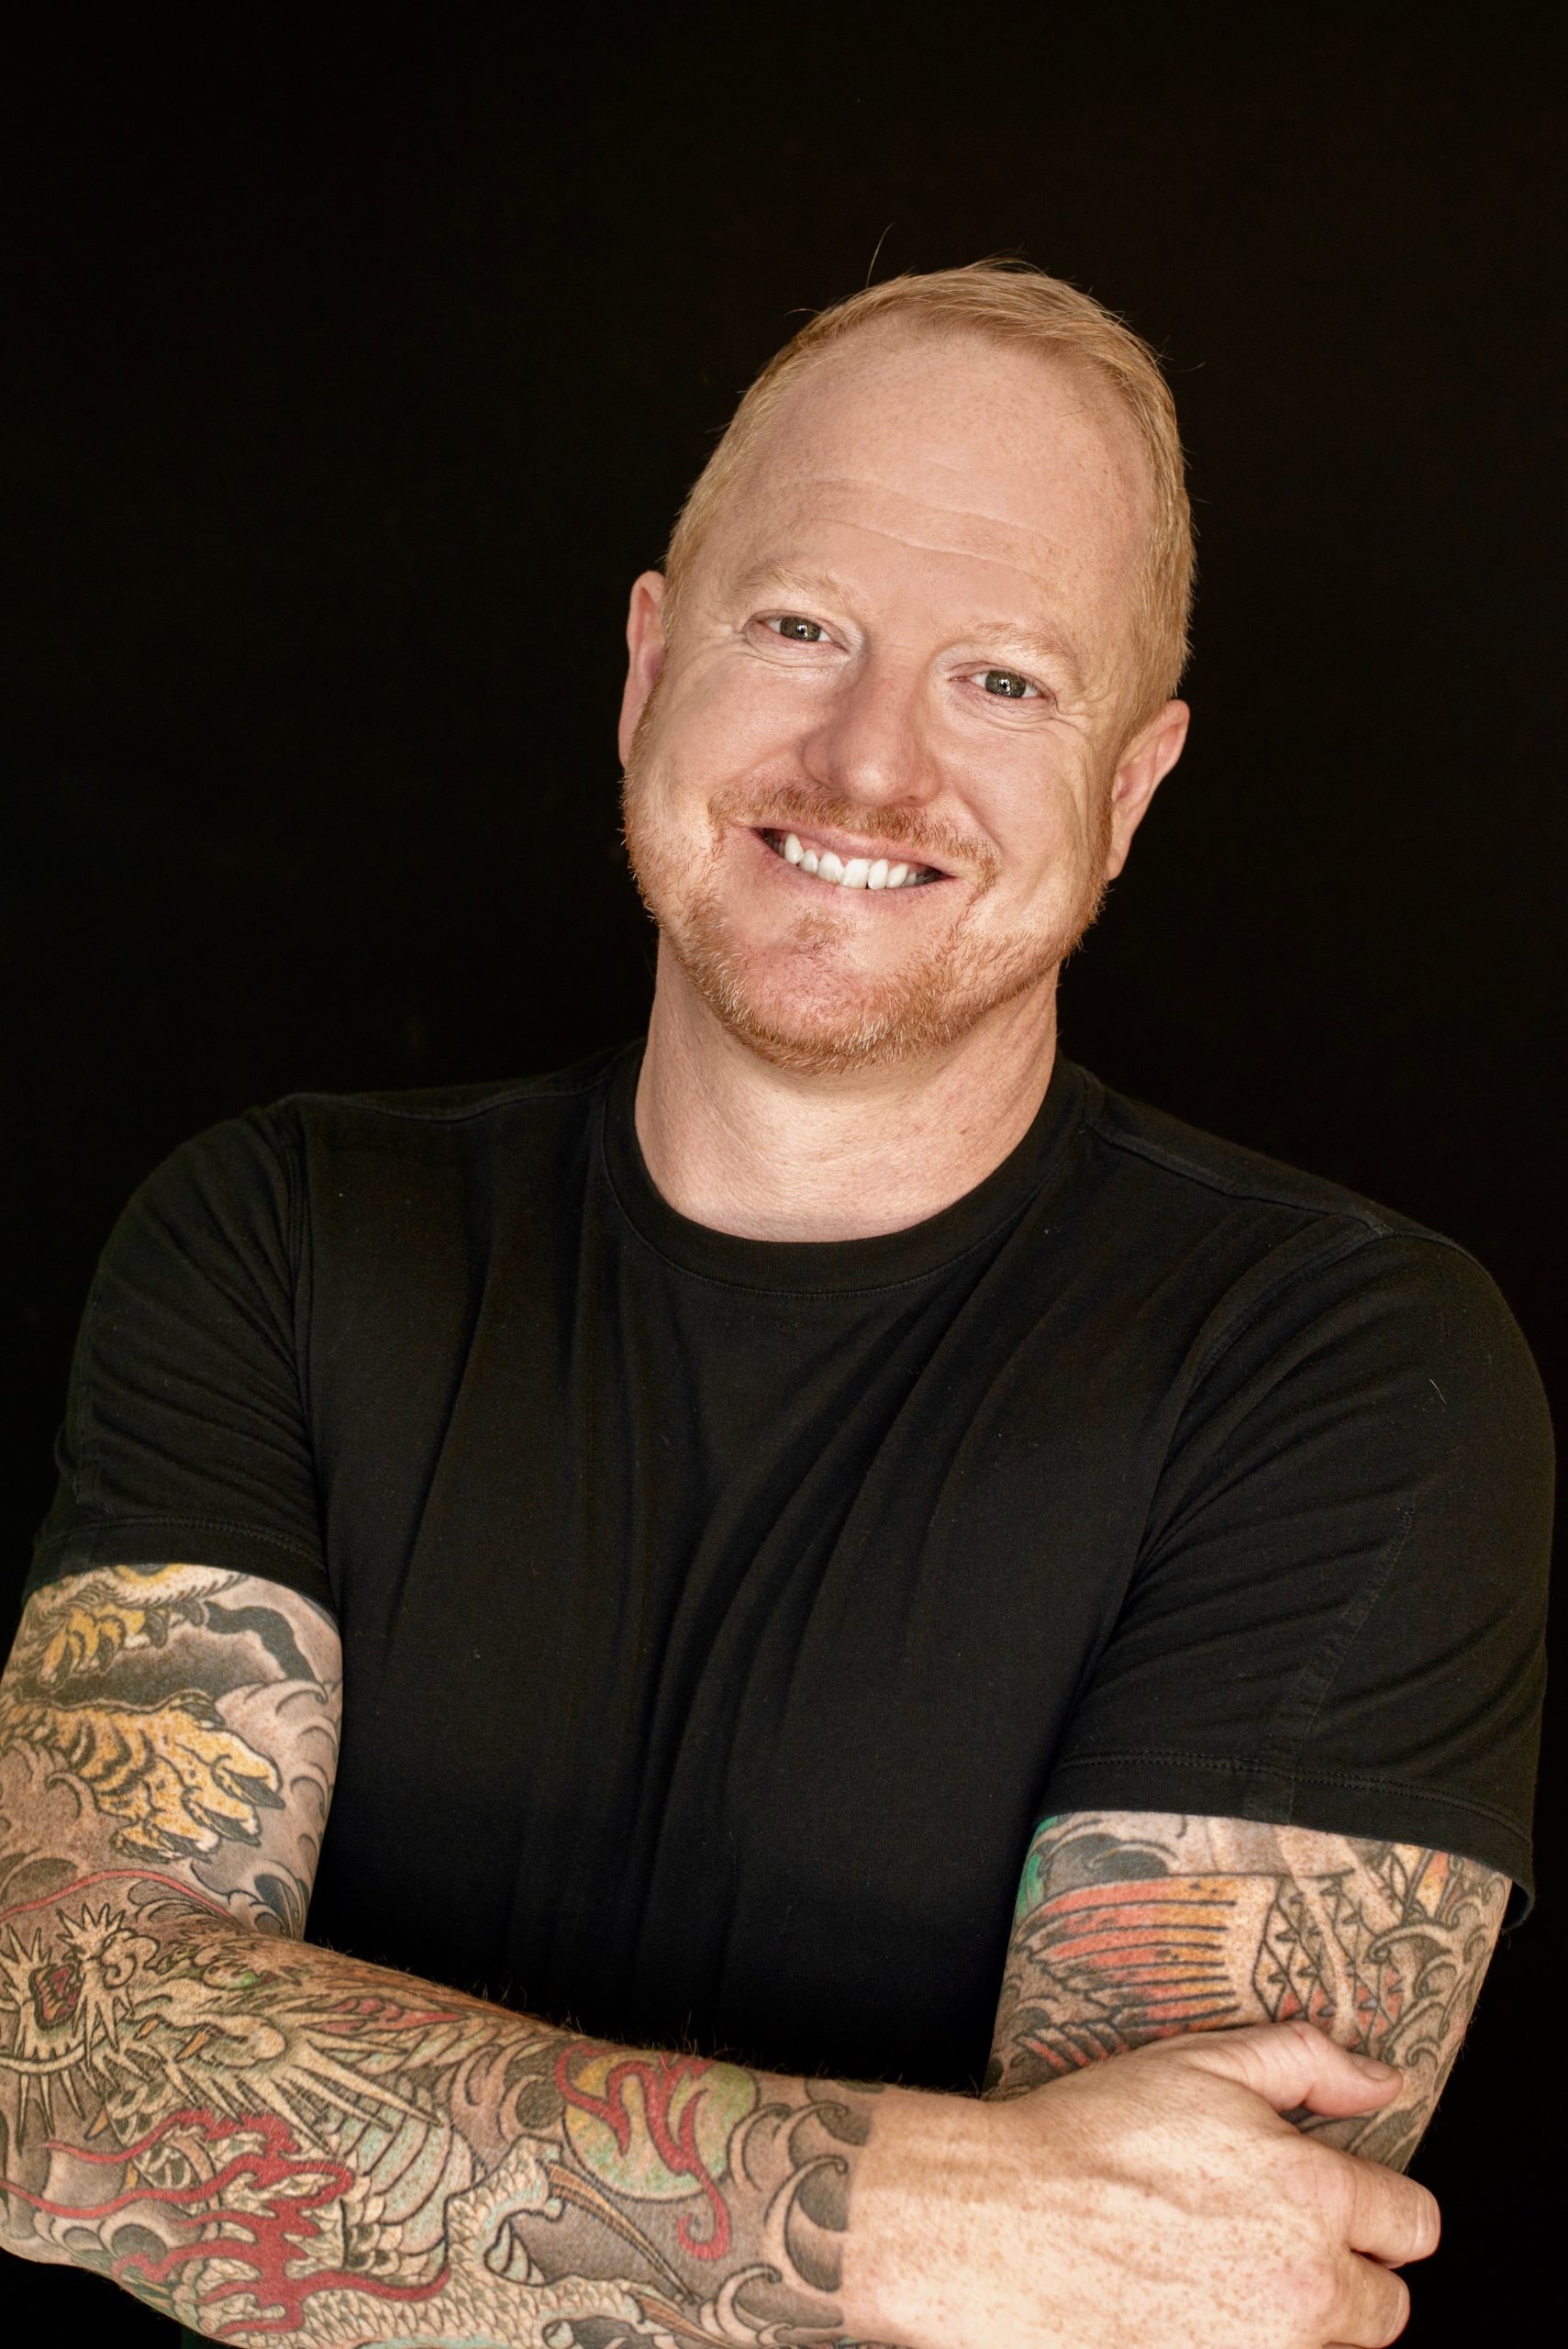 Nikolas Badminton, a white man with short red hair, beard, and moustache, is standing in front of a black background with his tattooed arms crossed, wearing a black t-shirt.